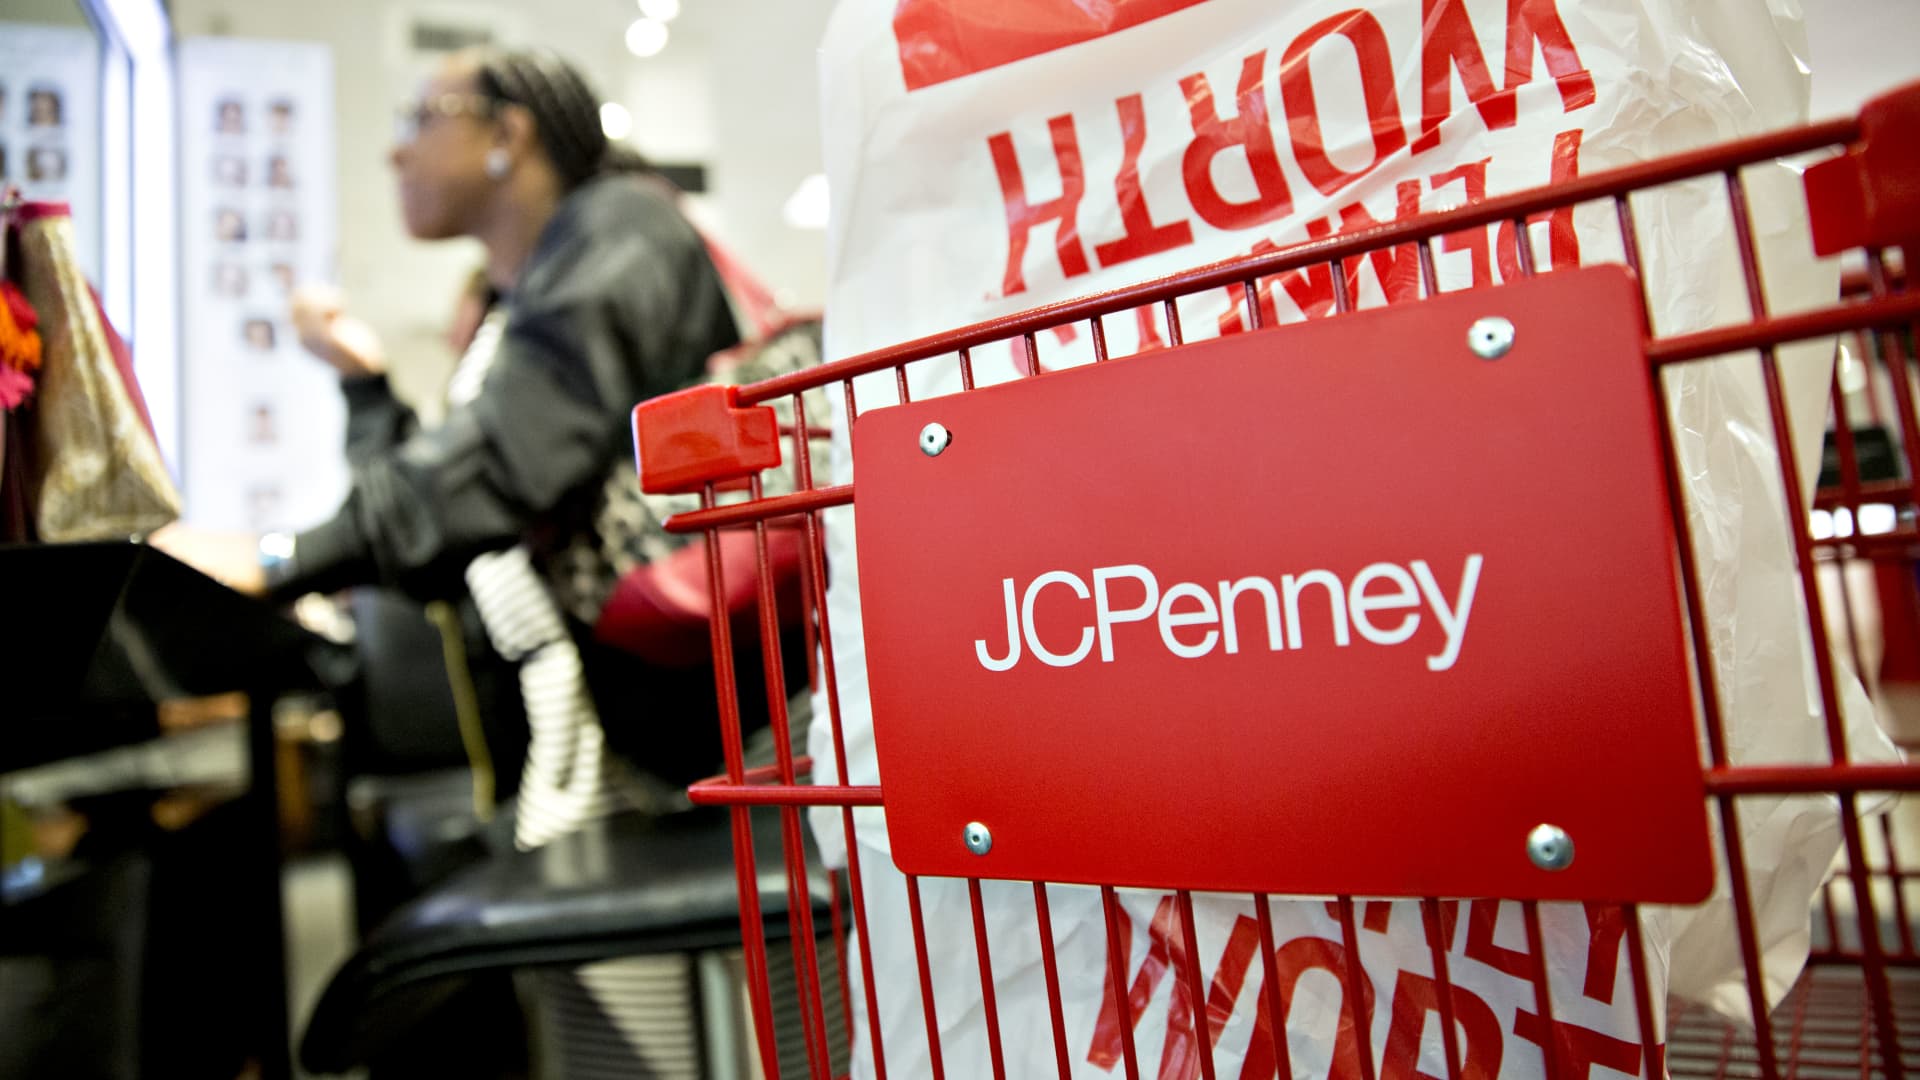 Signage is seen on a shopping cart inside a J.C. Penney Co. store in Peoria, Illinois.